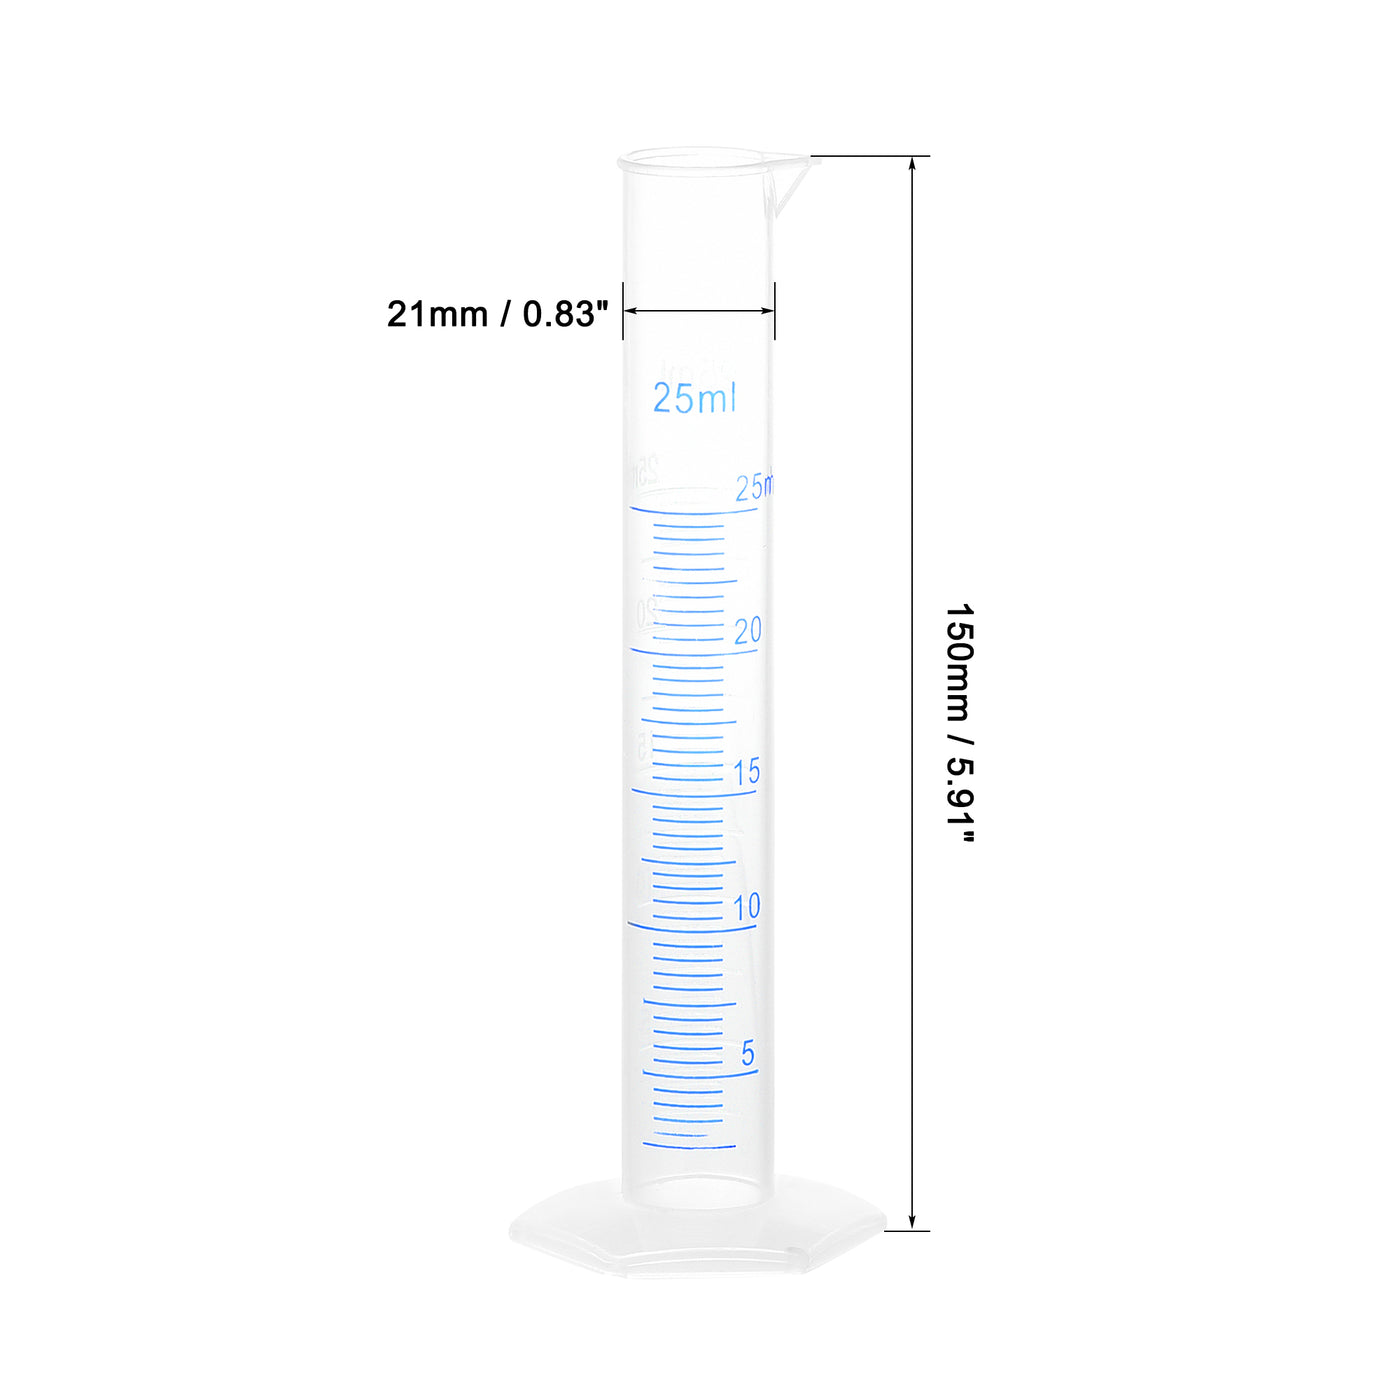 uxcell Uxcell Plastic Graduated Cylinder, 25ml Measuring Cylinder, 2-Sided Metric Marking 4Pcs